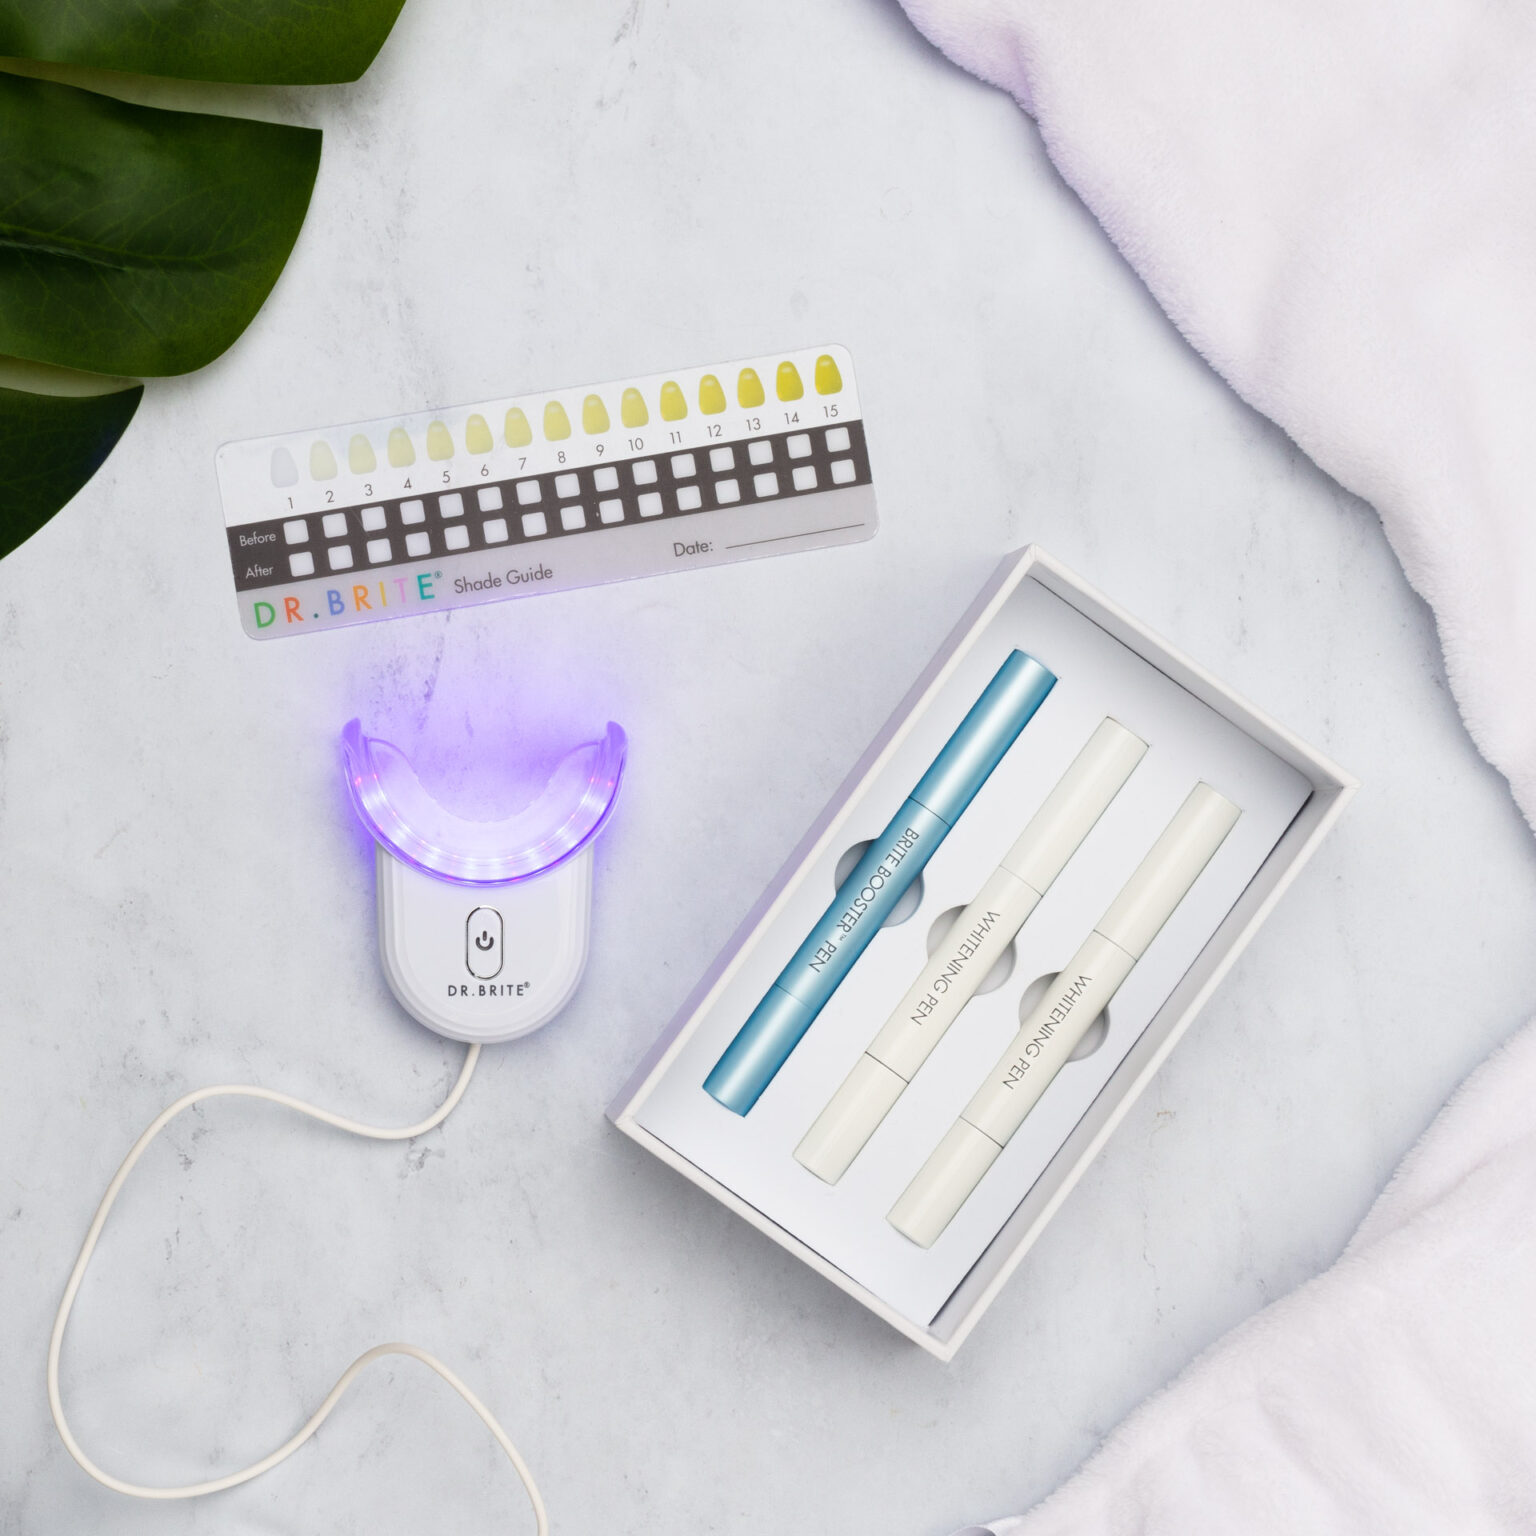 Dr. Brite offers one of the most effective teeth whitening kits in the world. Learn more about the kit and its benefits here.